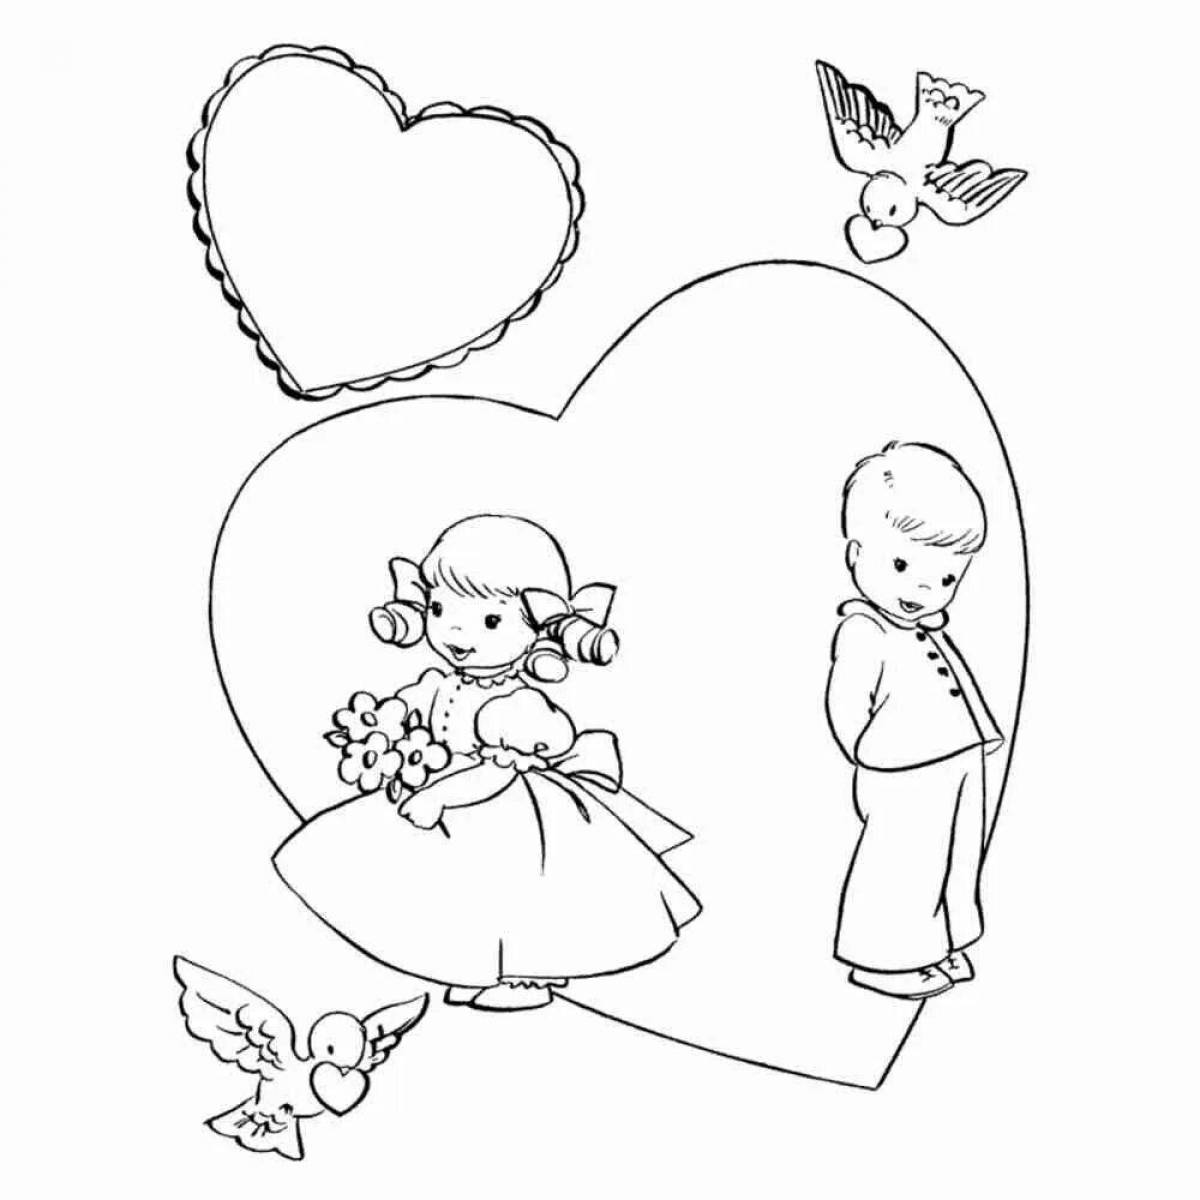 Radiant valentine coloring book for valentine's day for kids